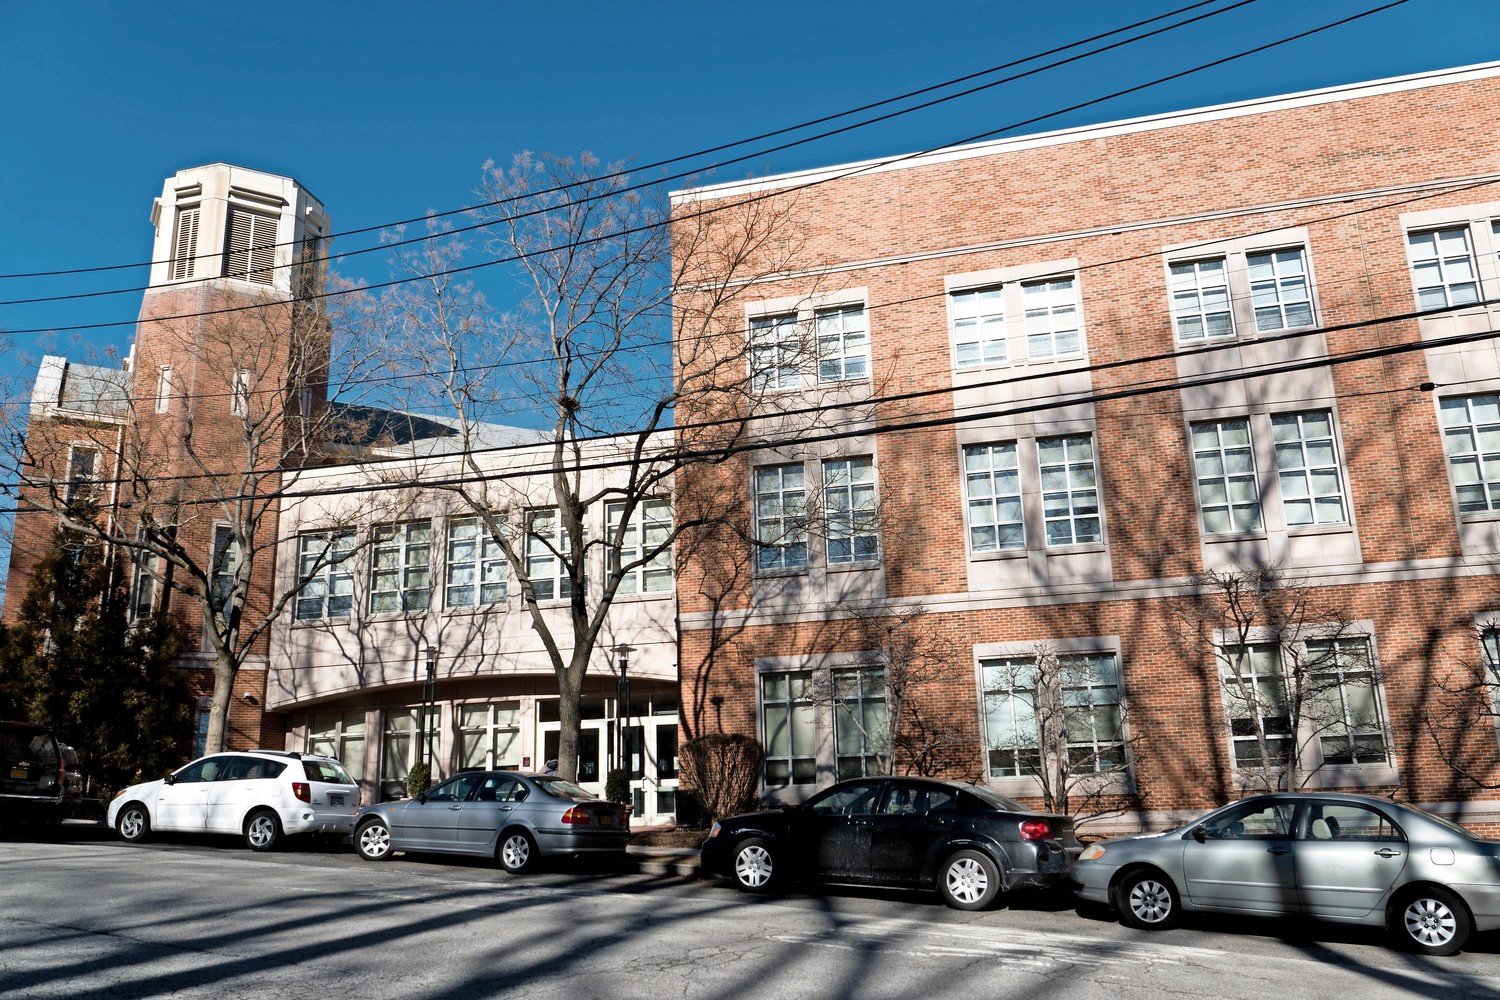 Horace Mann School has shut down the in-person classrooms of its middle and upper divisions following 'multiple' positive coronavirus tests. Classes more remote for at least the next two weeks.